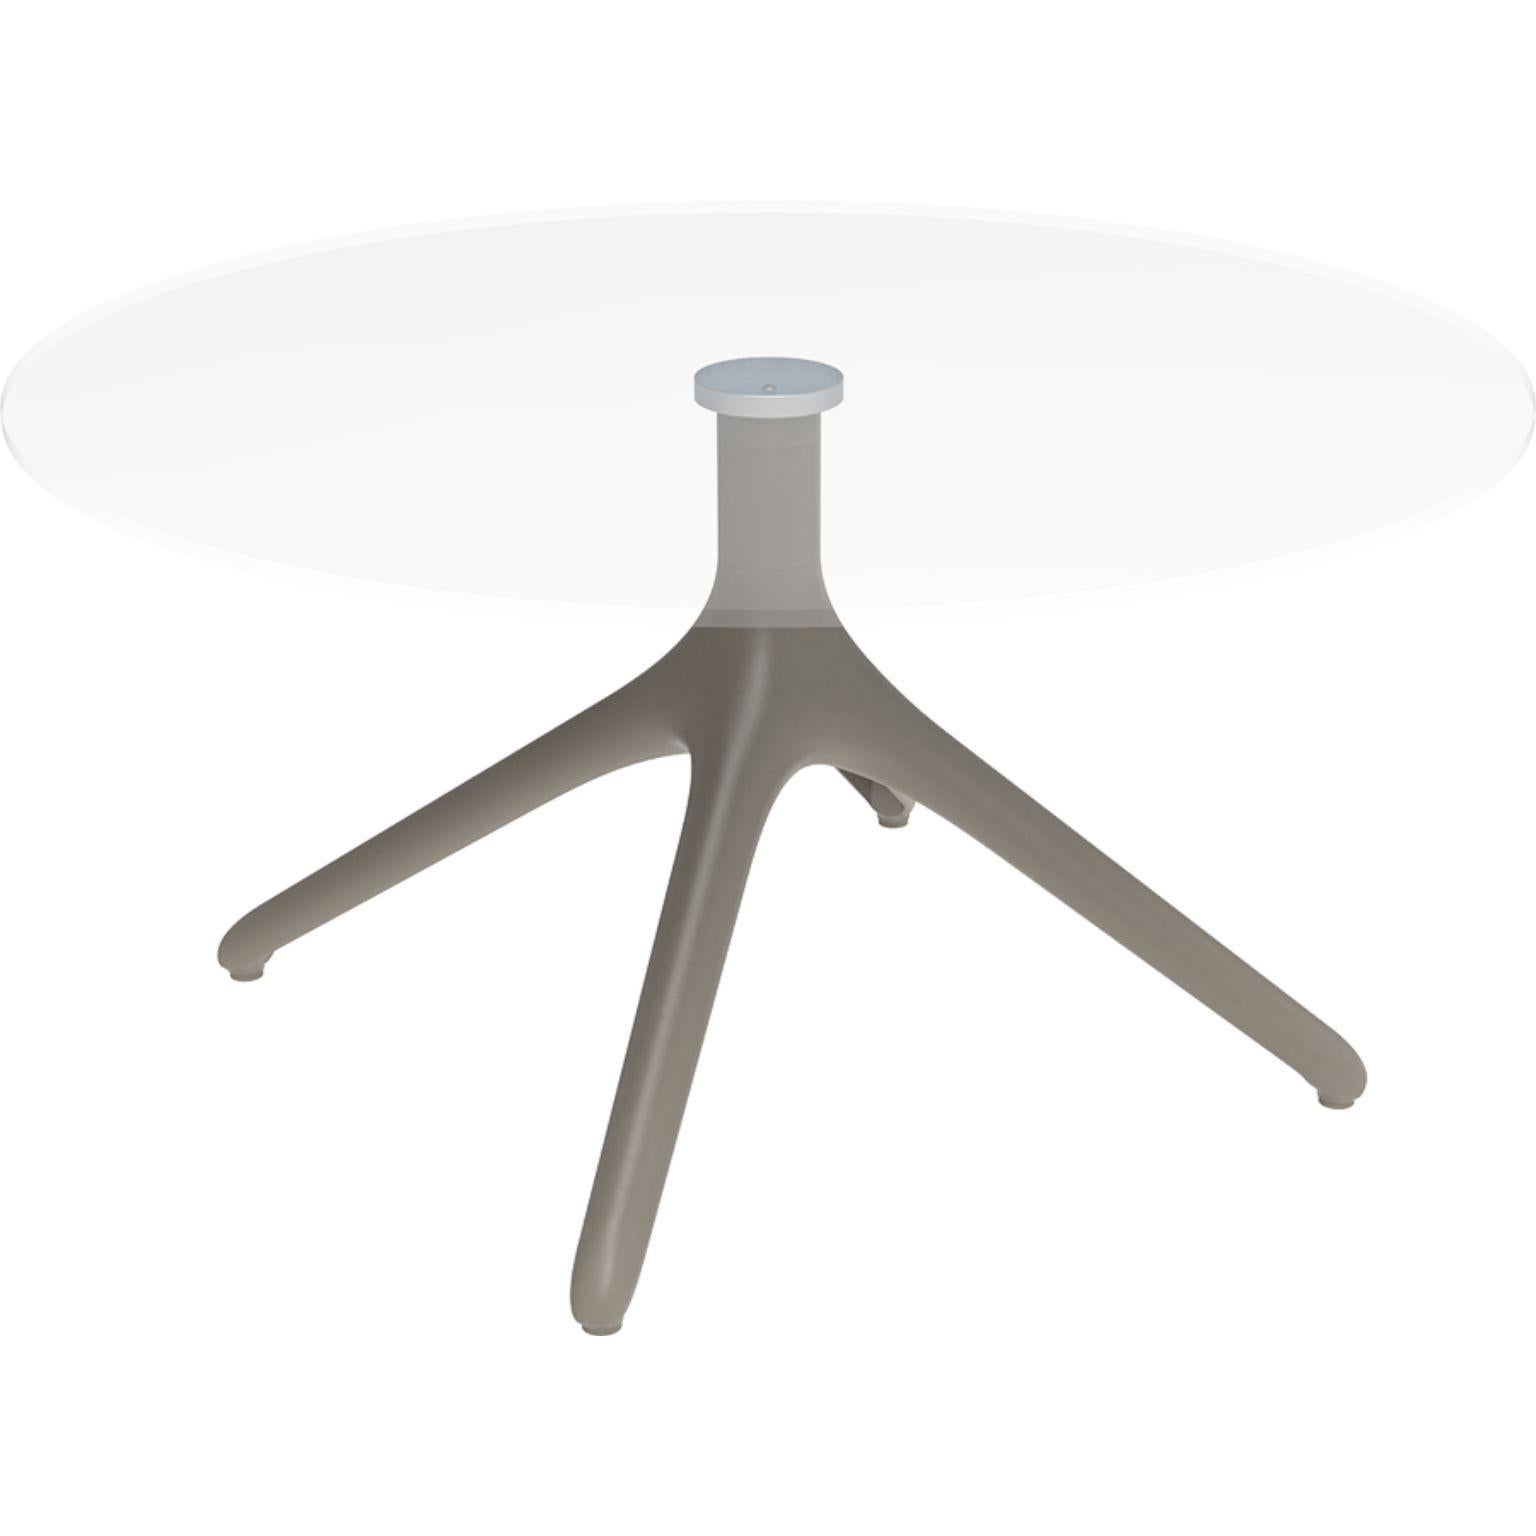 Uni cream table XL 50 by MOWEE
Dimensions: D 50 x H 50 cm
Material: Aluminium, tempered glass
Weight: 8.8 kg
Also available in different colours and finishes.

A table designed to be as versatile as possible and can coexist with a variety of